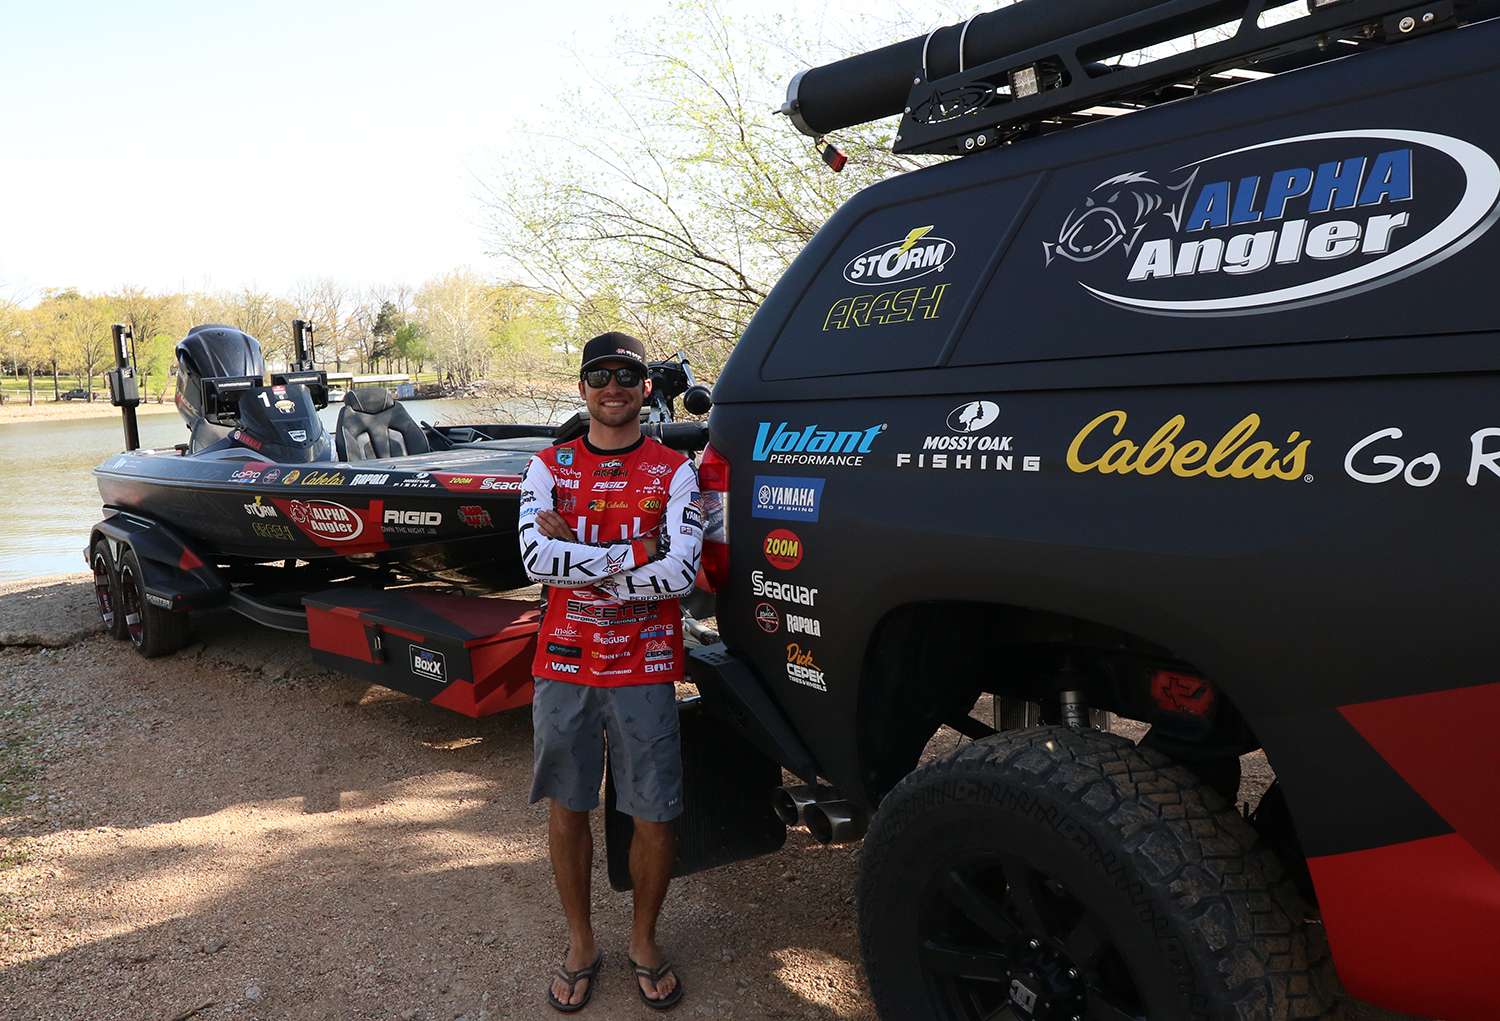 The 2017 Toyota Bassmaster Angler of the Year Brandon Palaniuk took a few minutes to give us an up-close and personal tour of his 2018 Skeeter FX.